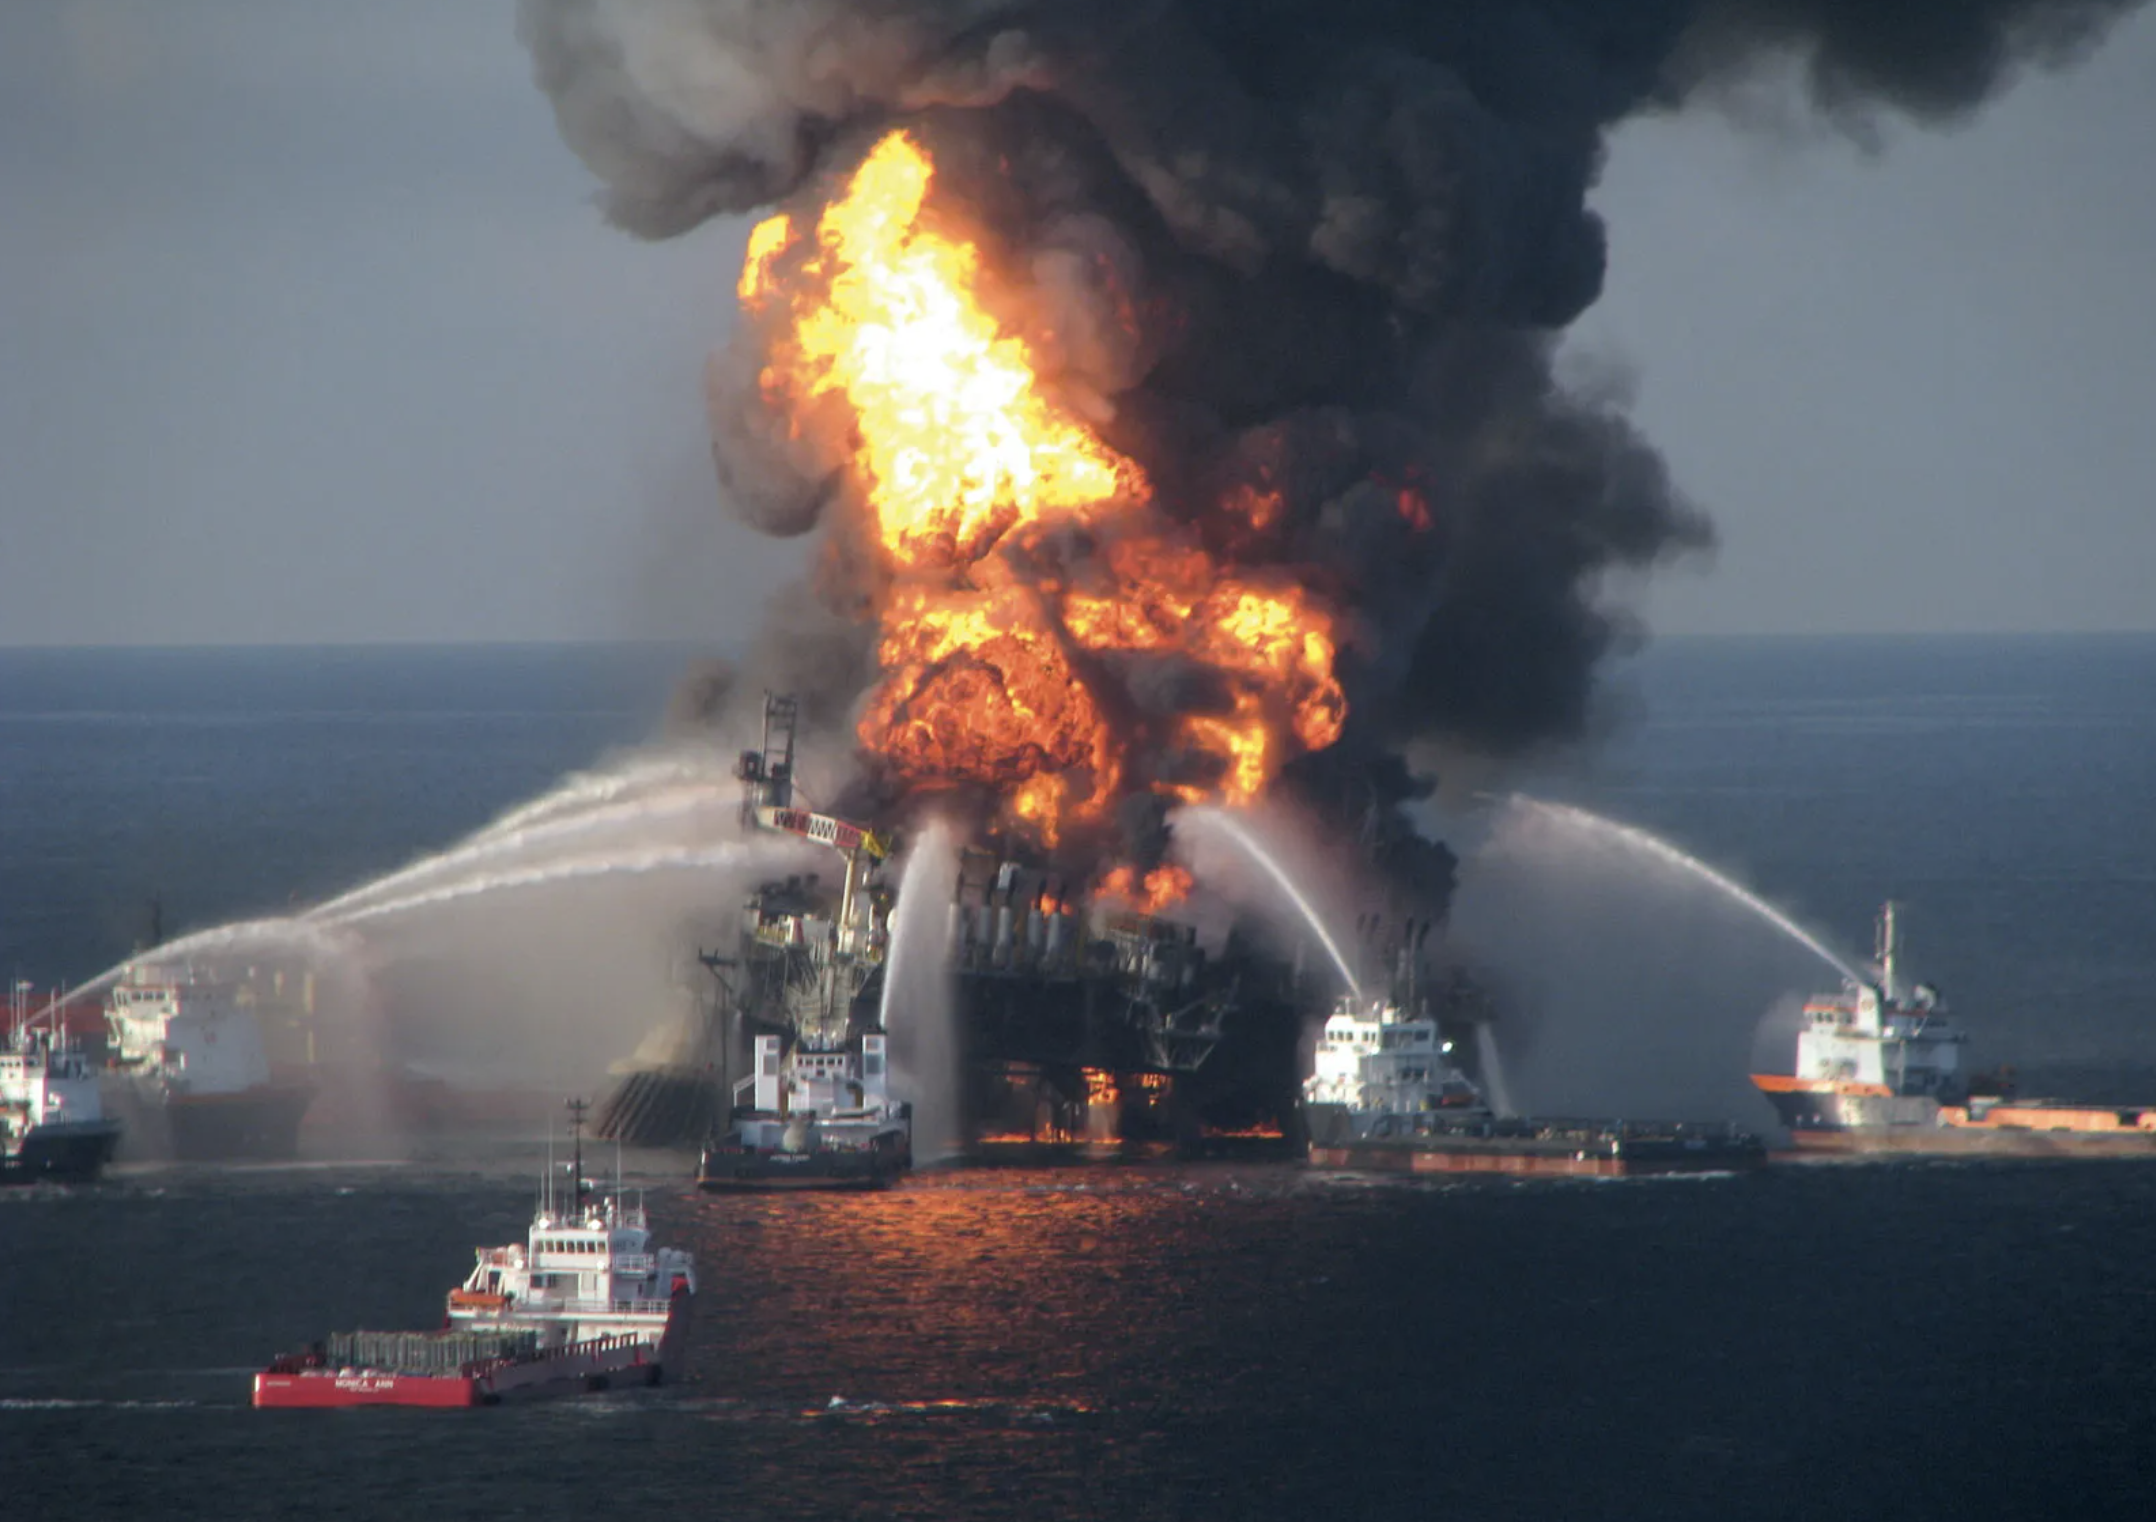 US coast guard ships fight fire after the Deepwater Horizon explosion